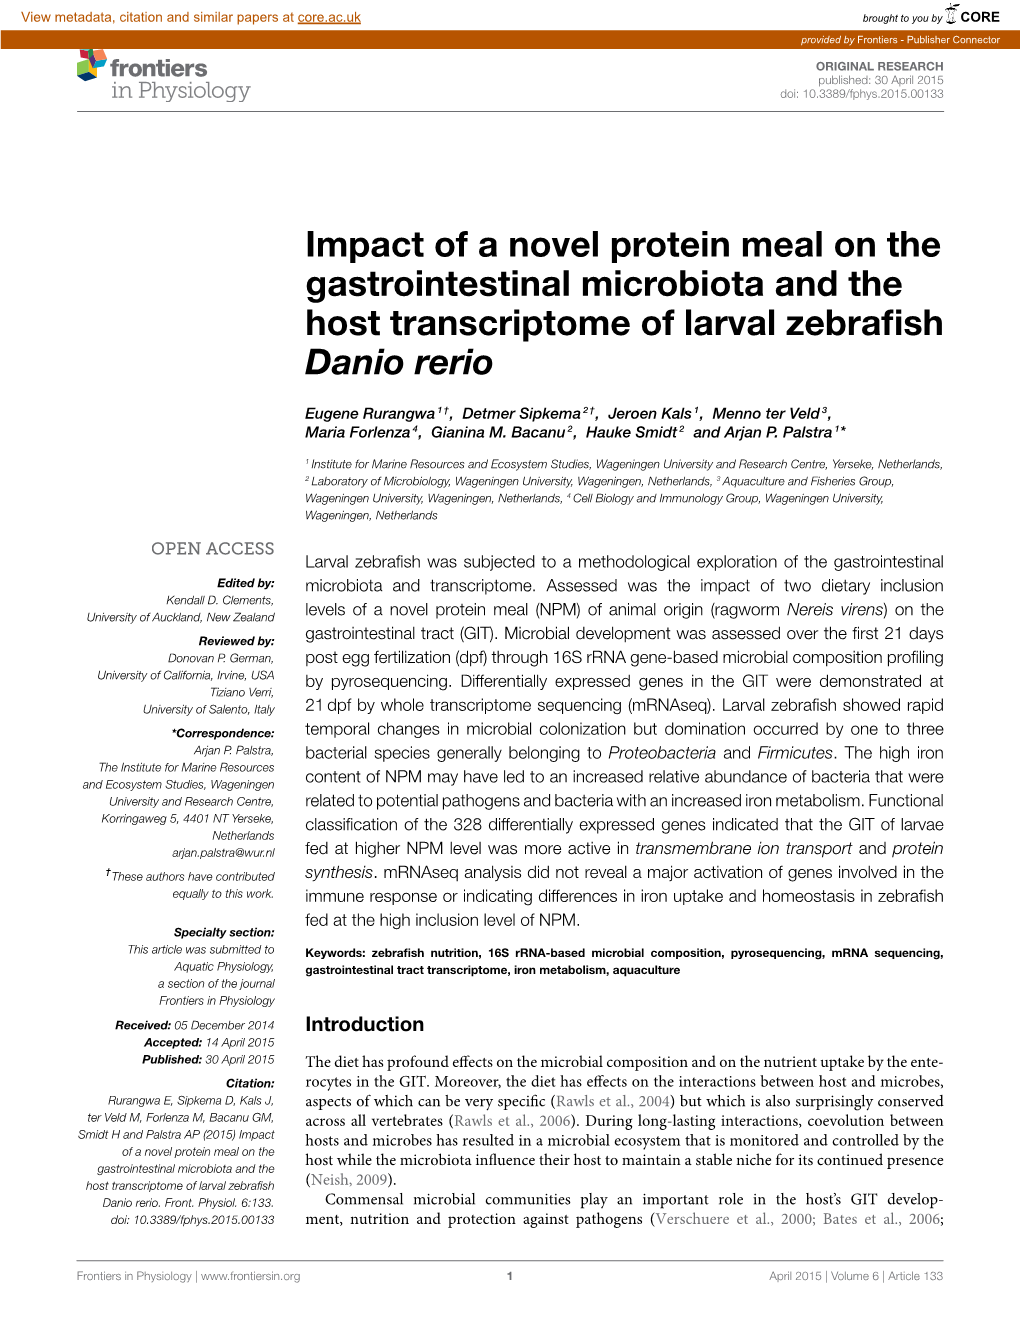 Impact of a Novel Protein Meal on the Gastrointestinal Microbiota and the Host Transcriptome of Larval Zebraﬁsh Danio Rerio